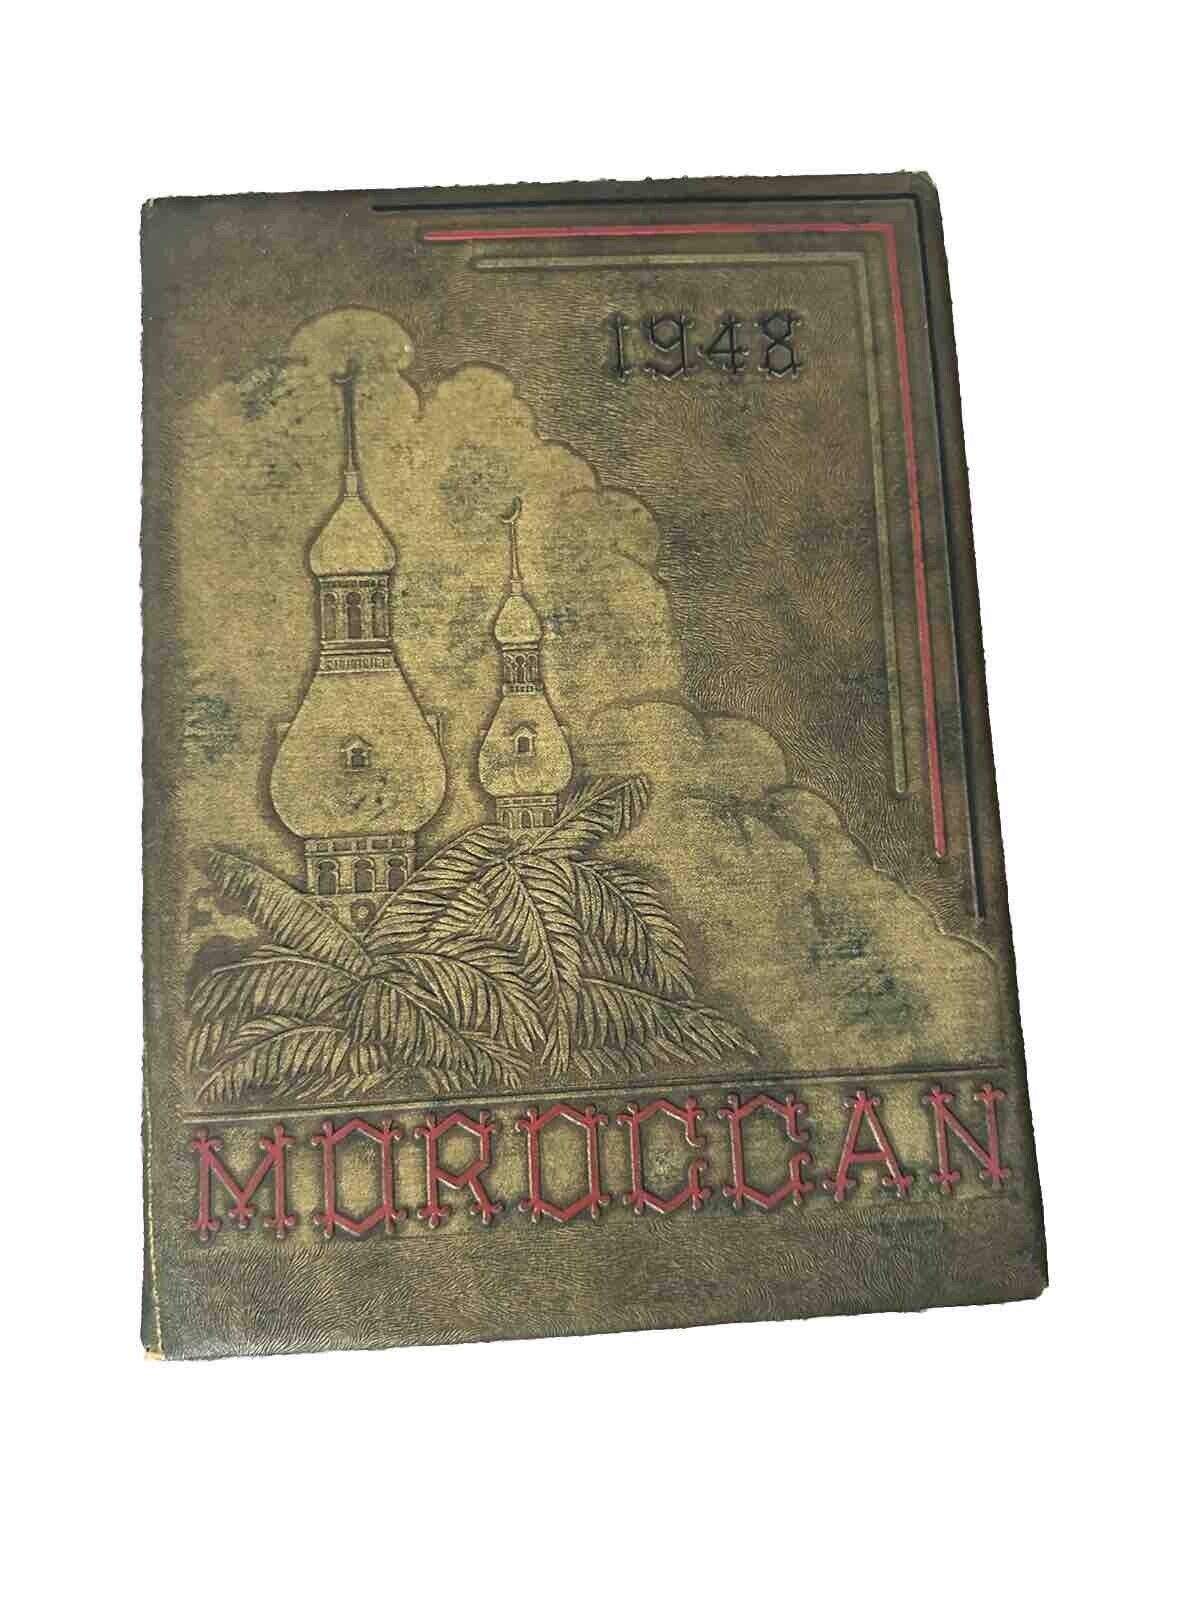 1948 MOROCCAN UNIVERSITY OF TAMPA YEARBOOK